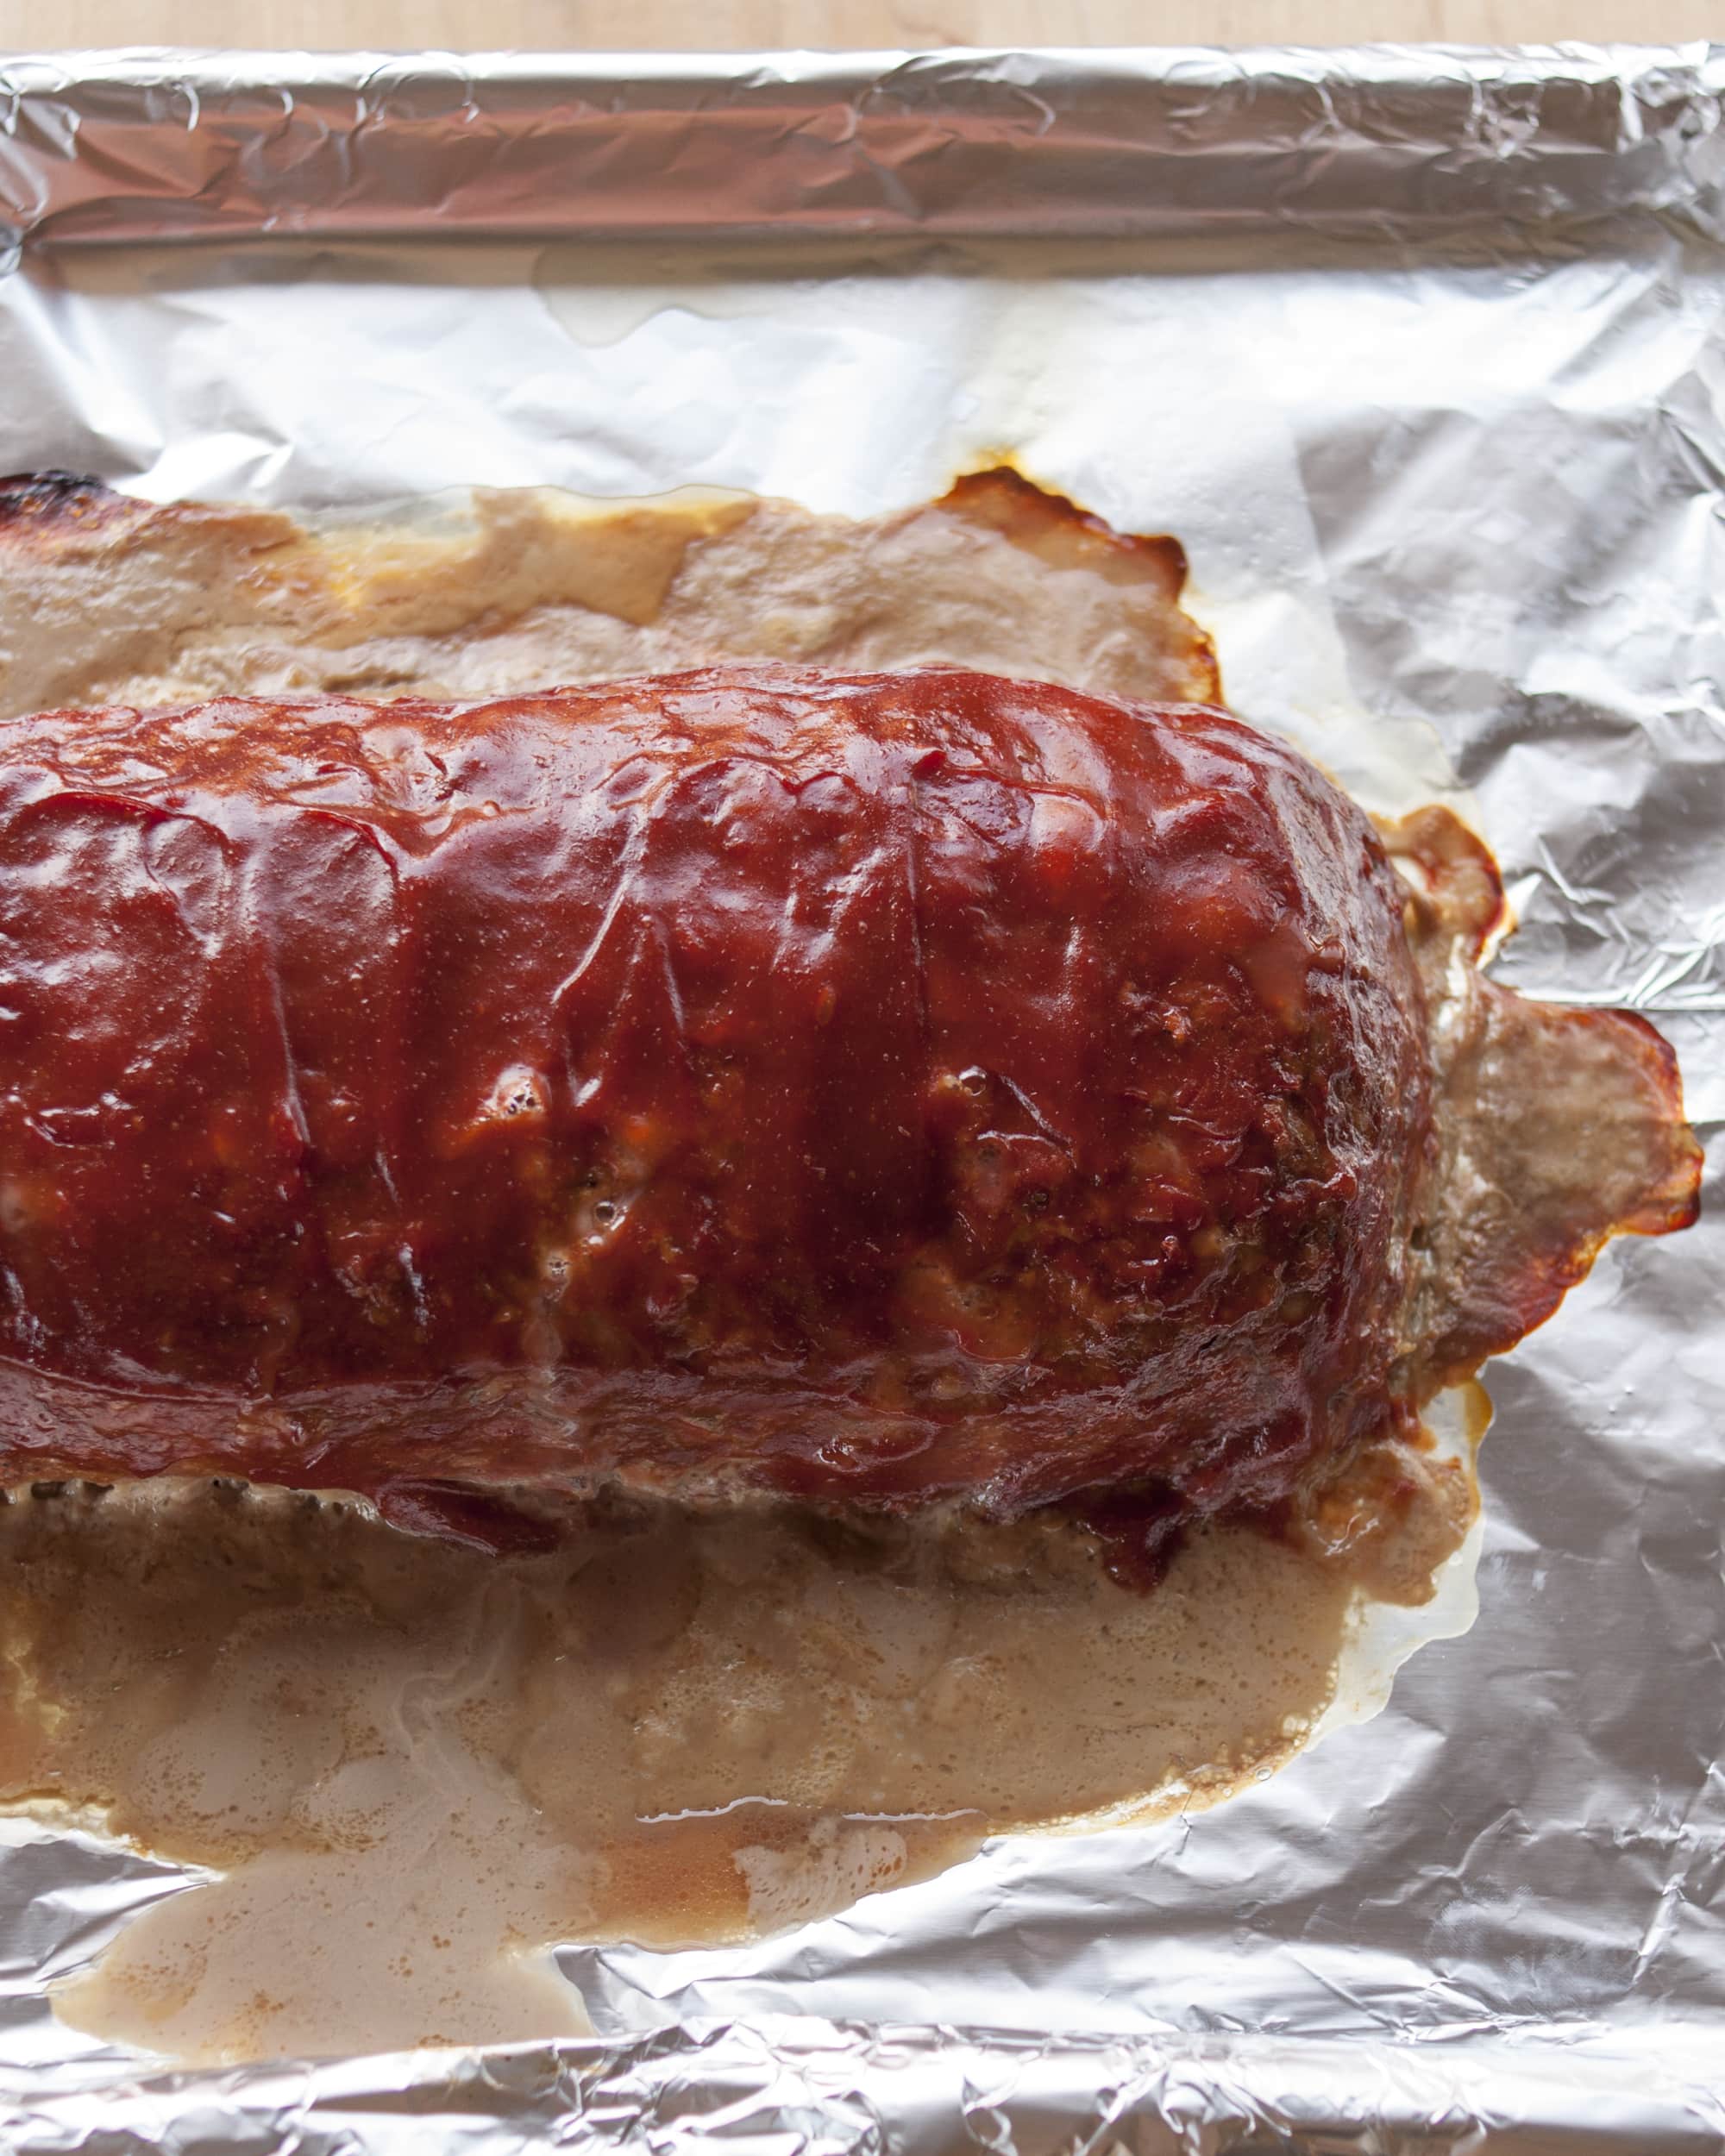 How To Make Meatloaf from Scratch | Kitchn